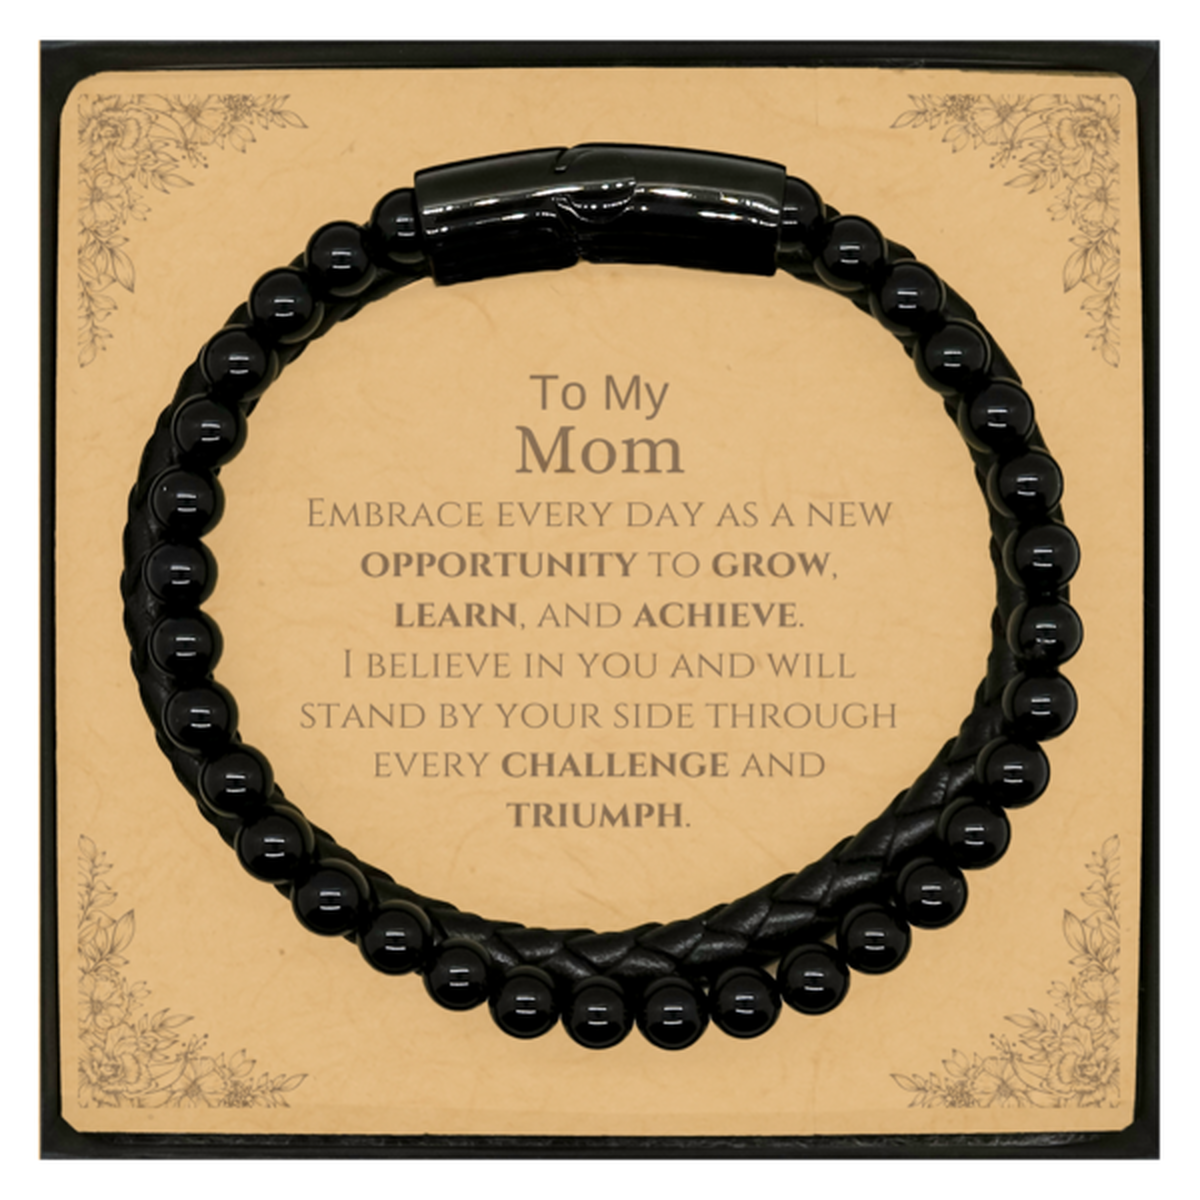 To My Mom Gifts, I believe in you and will stand by your side, Inspirational Stone Leather Bracelets For Mom, Birthday Christmas Motivational Mom Gifts